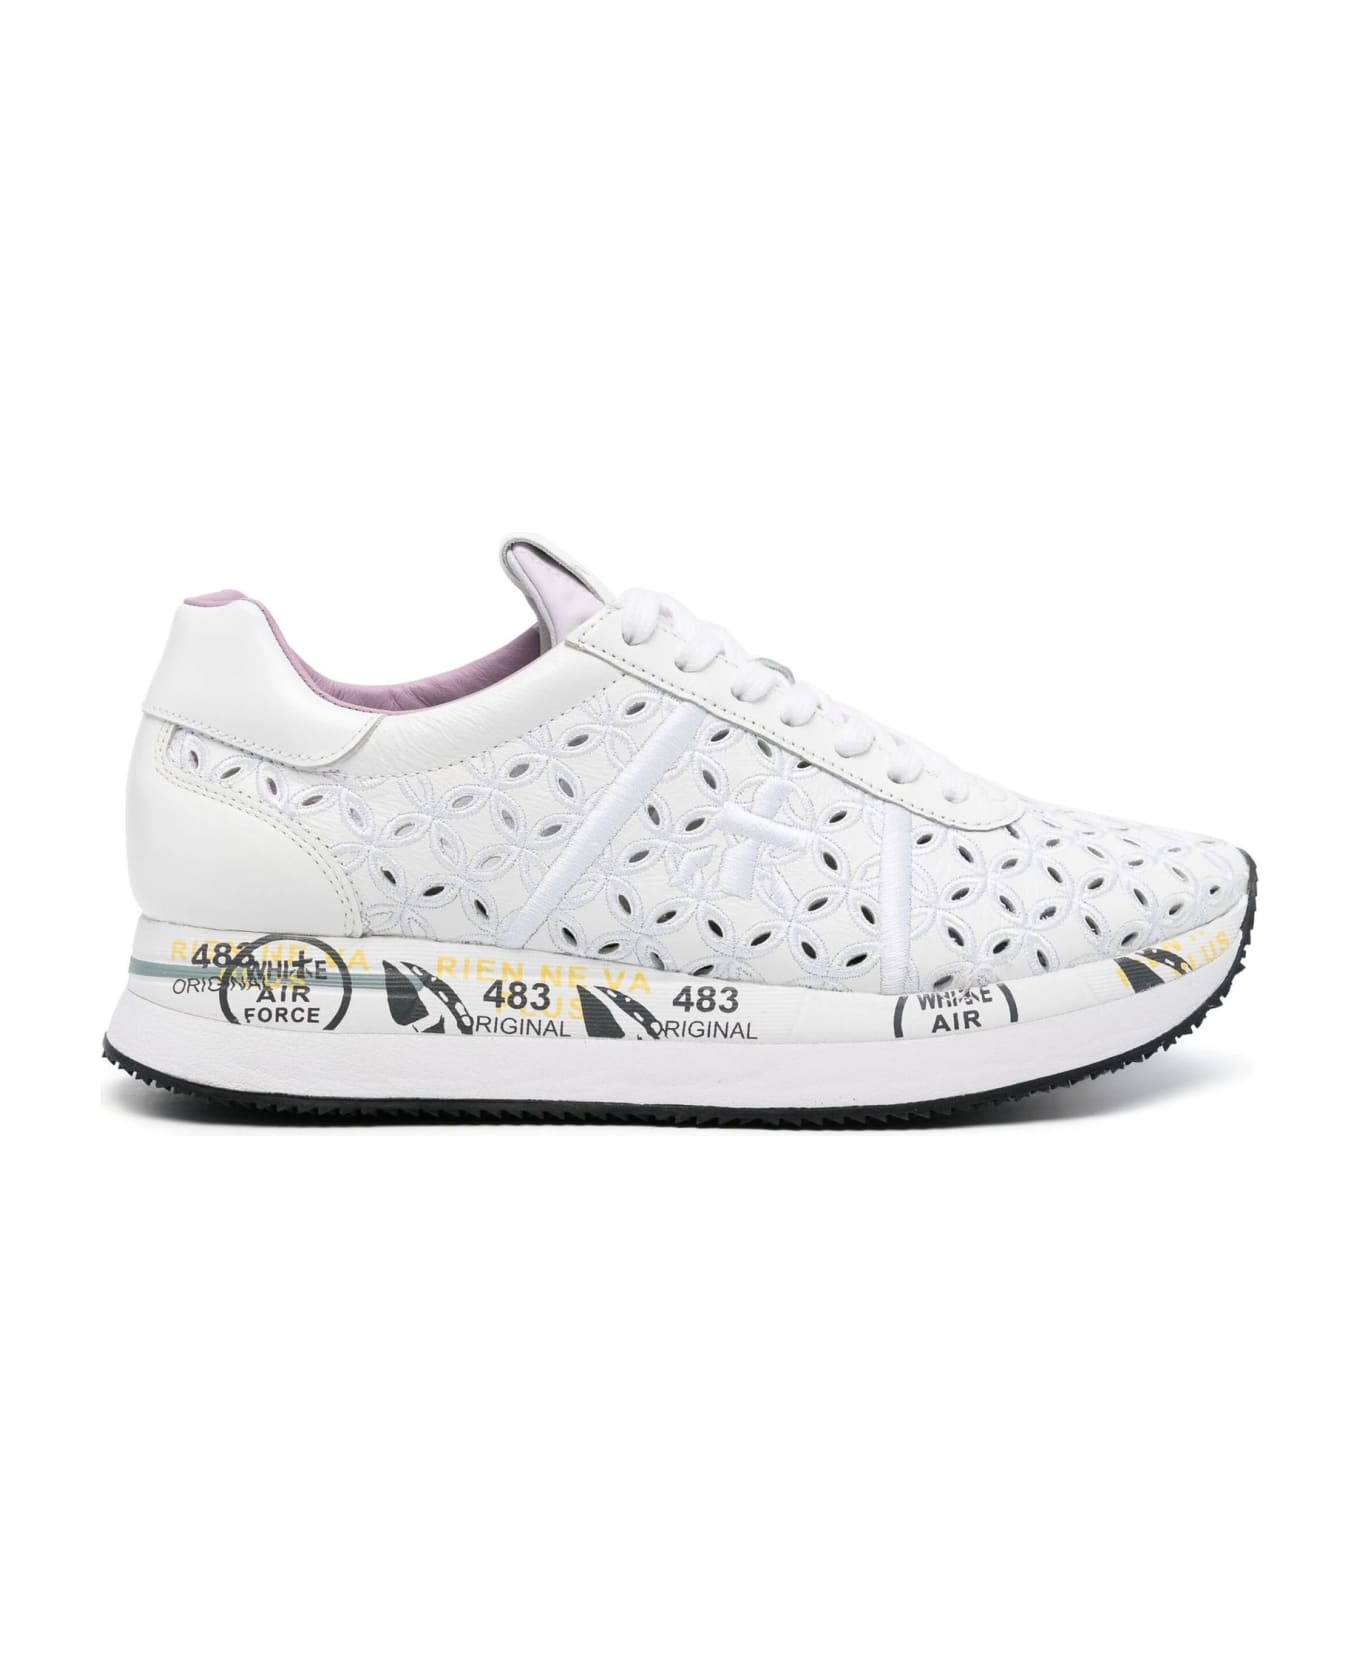 Premiata Conny Broderie-anglaise Sneakers - Bianco/nero スニーカー